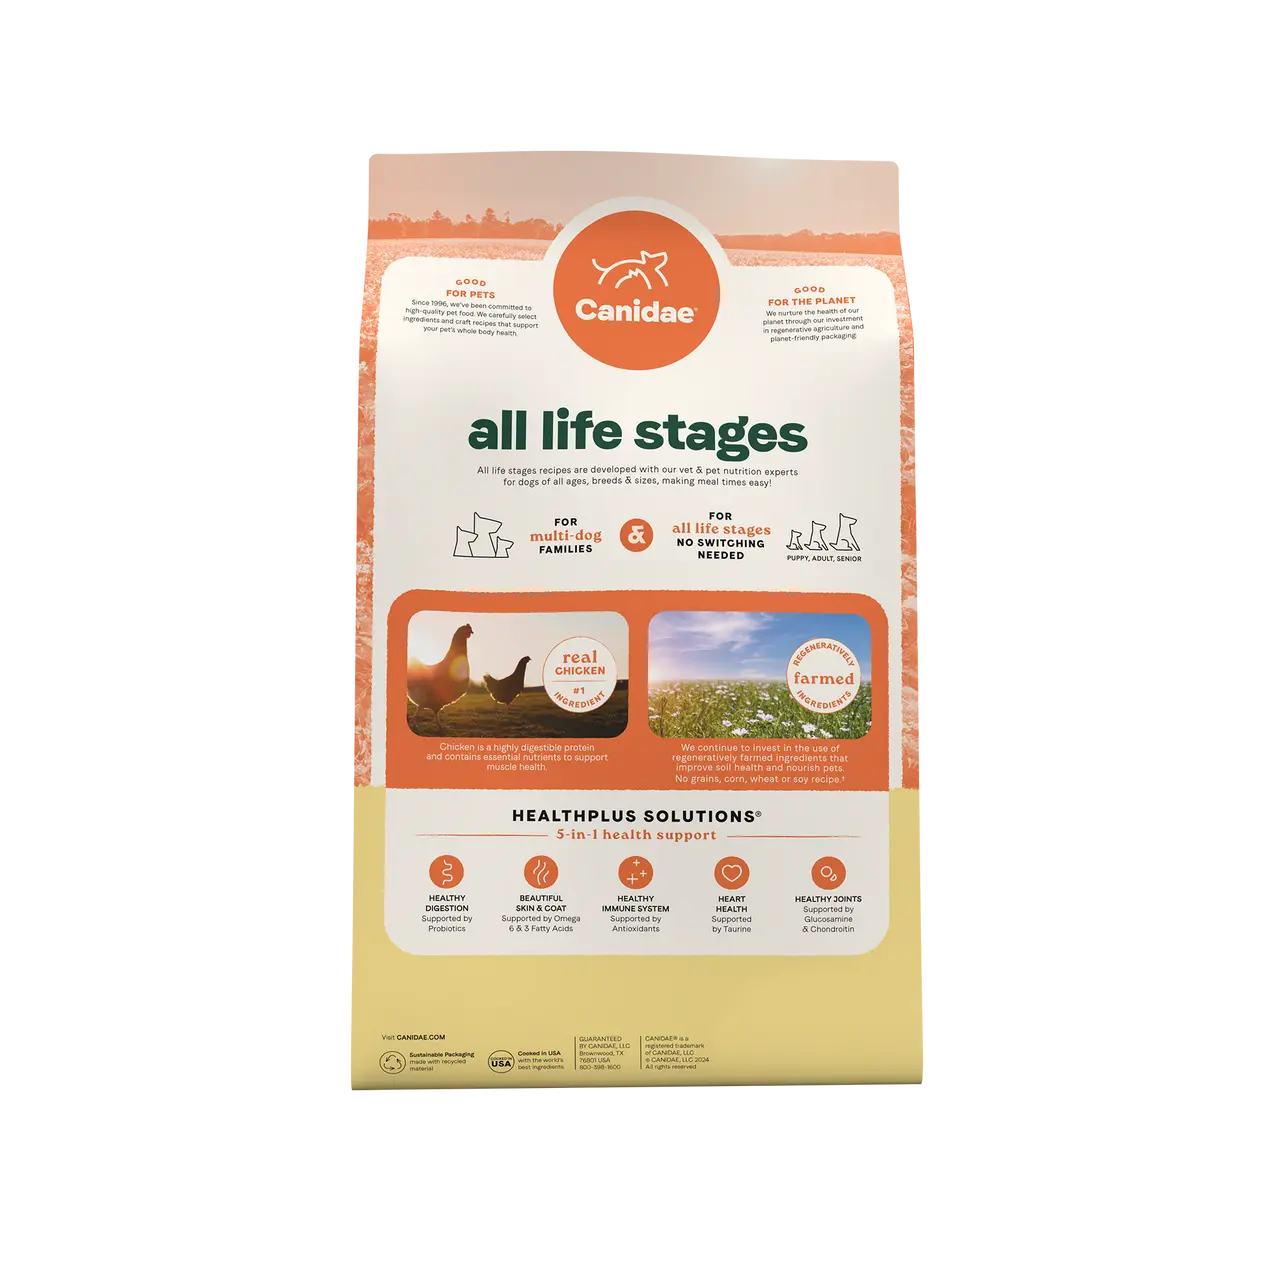 All Life Stages Dry Dog Food, Real Chicken & Potato Recipe CANIDAE